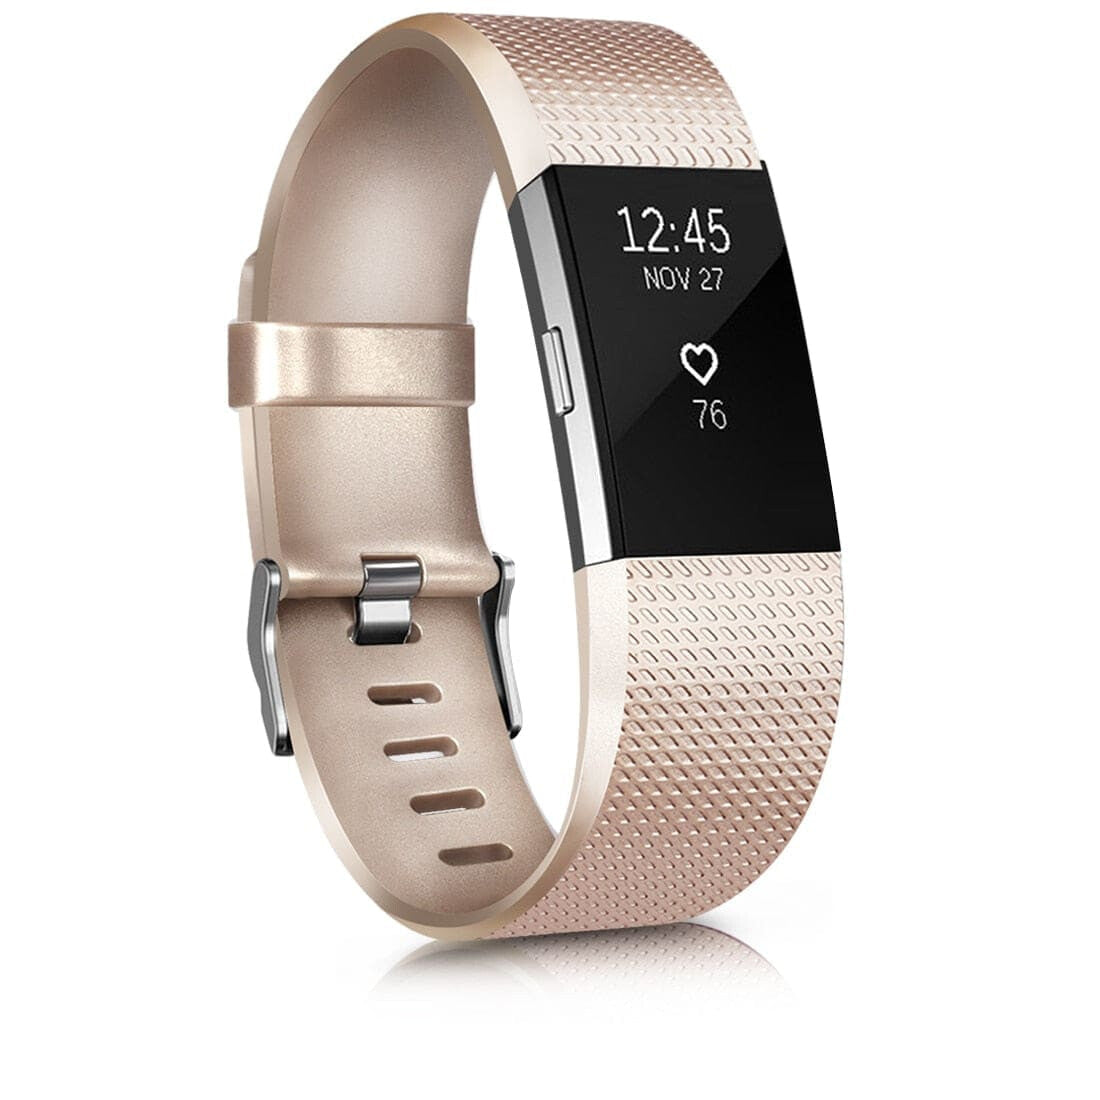 Silikon Armband für Fitbit Charge 2 - Gold / S - Fitbit Armband